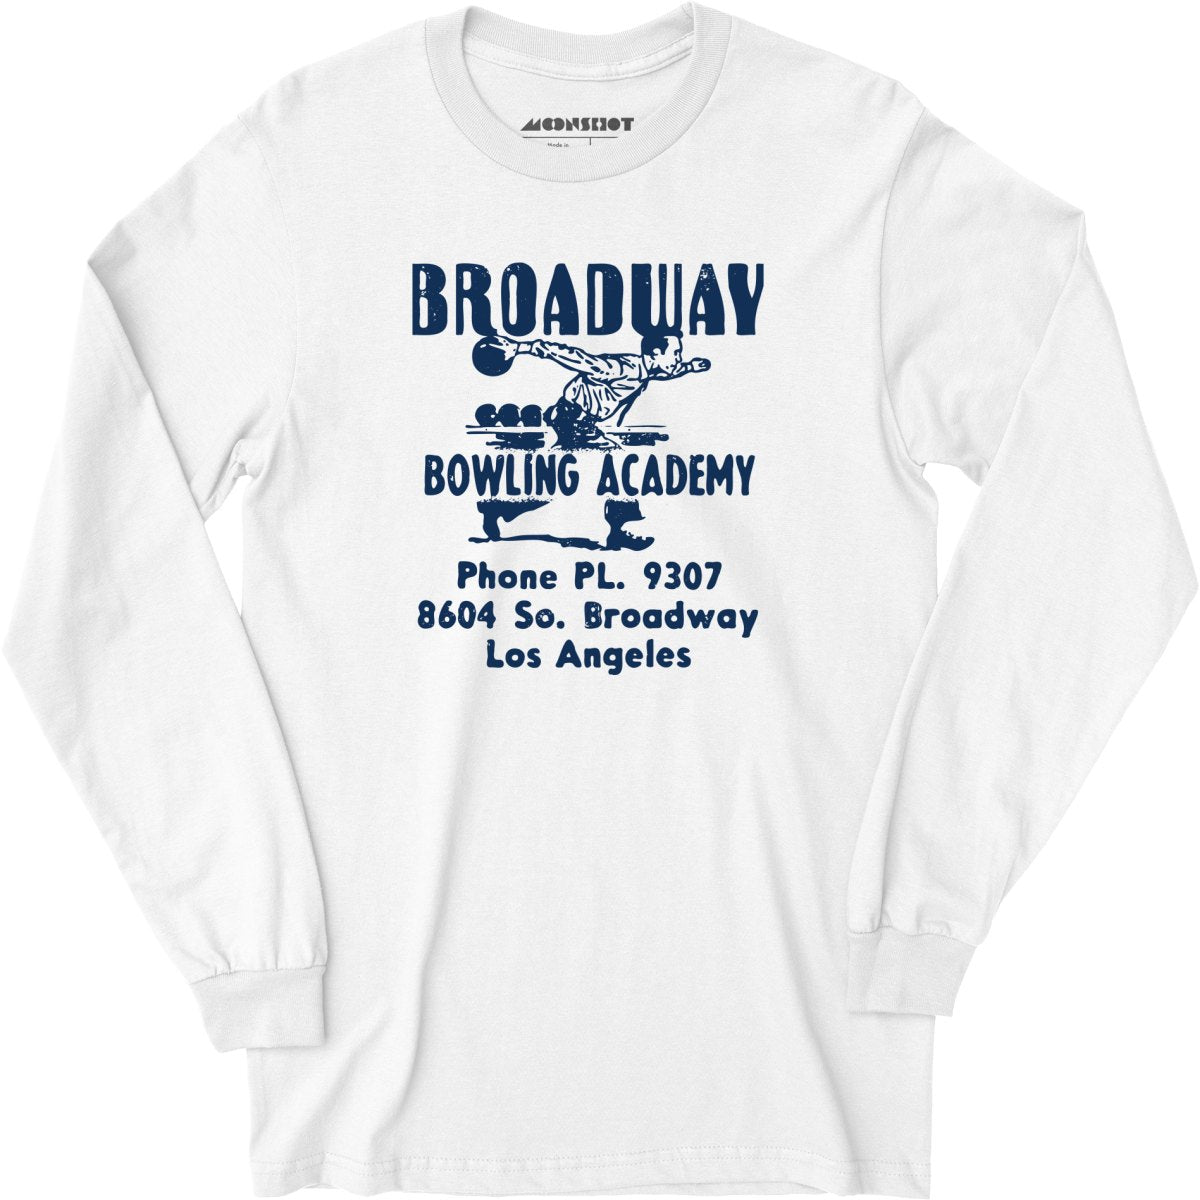 Broadway Bowling Academy - Los Angeles, CA - Vintage Bowling Alley - Long Sleeve T-Shirt